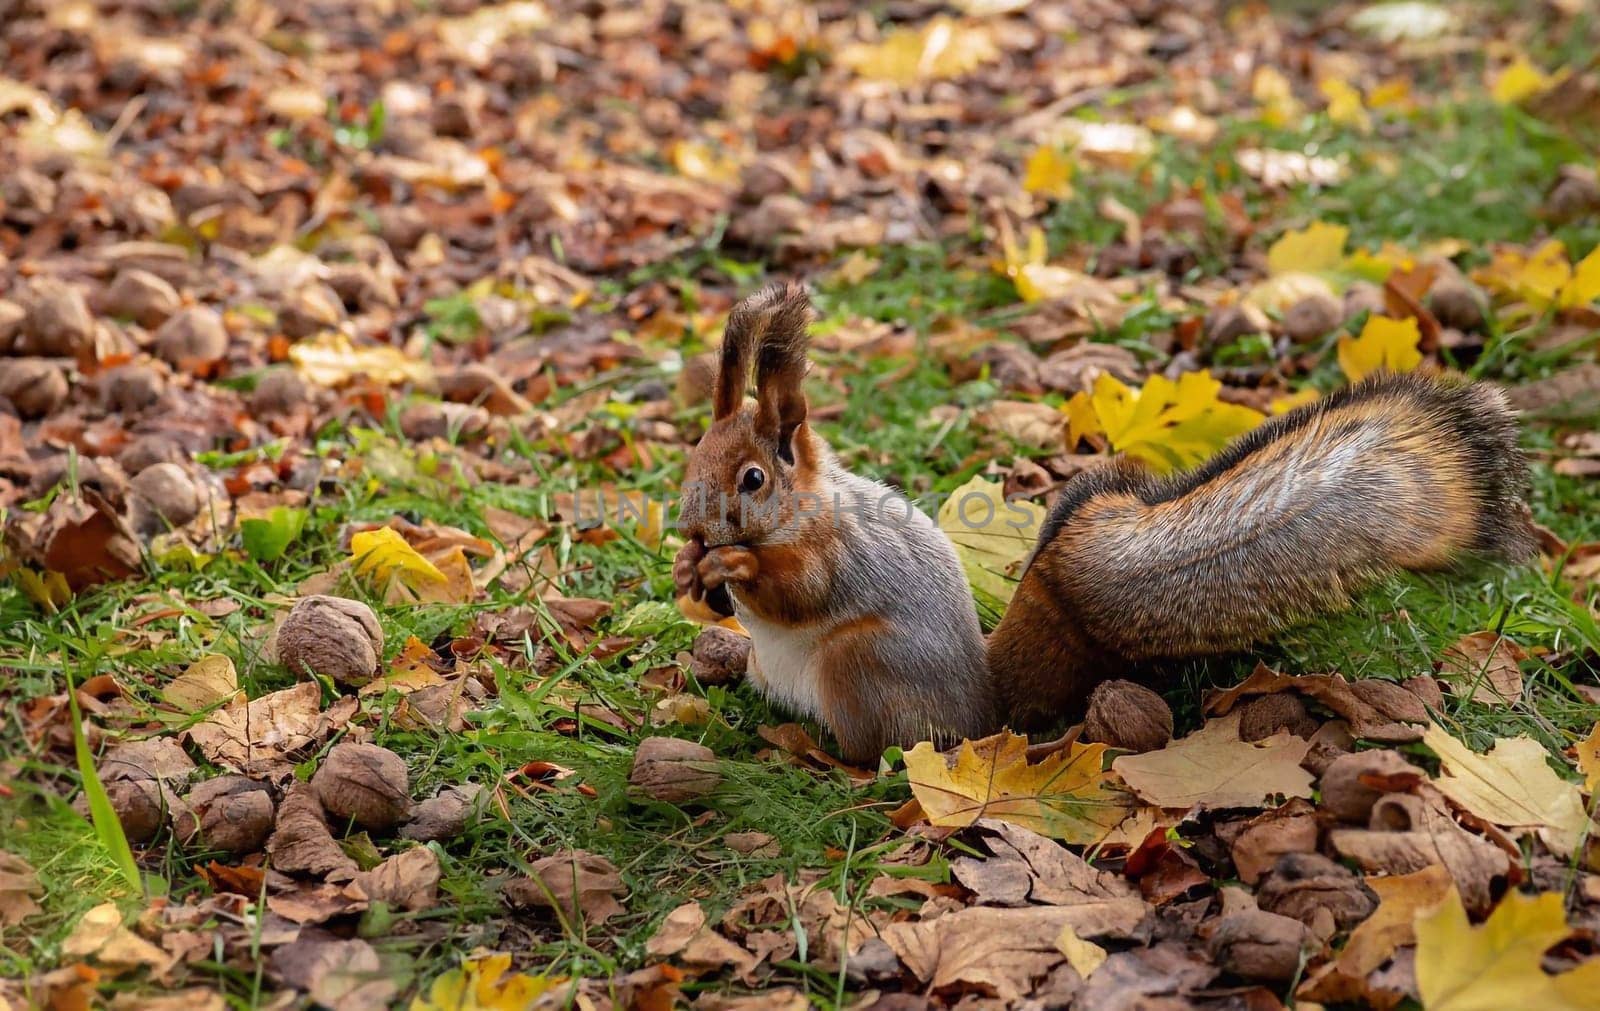 Squirrel sits on the asphalt in an autumn park and waits for a nut